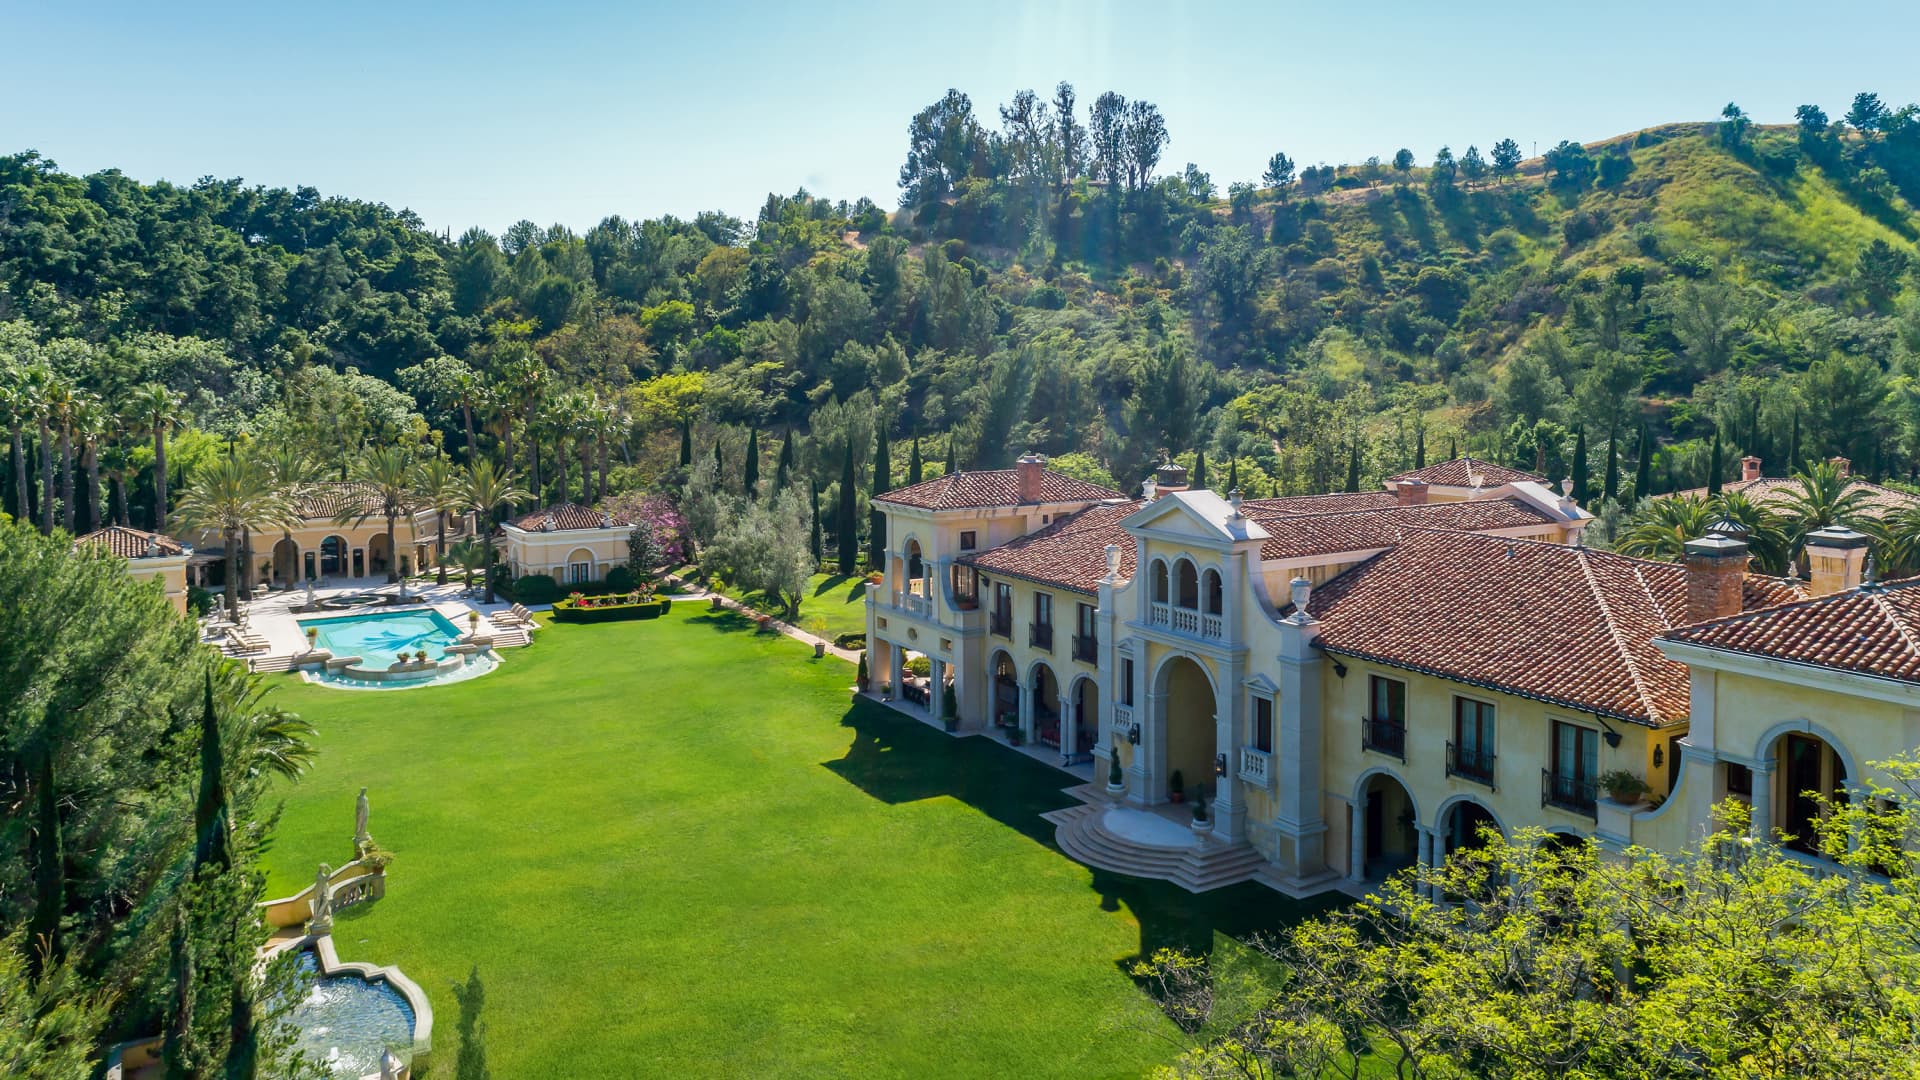 An aerial view of the grounds of Villa Firenze in Beverly Hills, California.